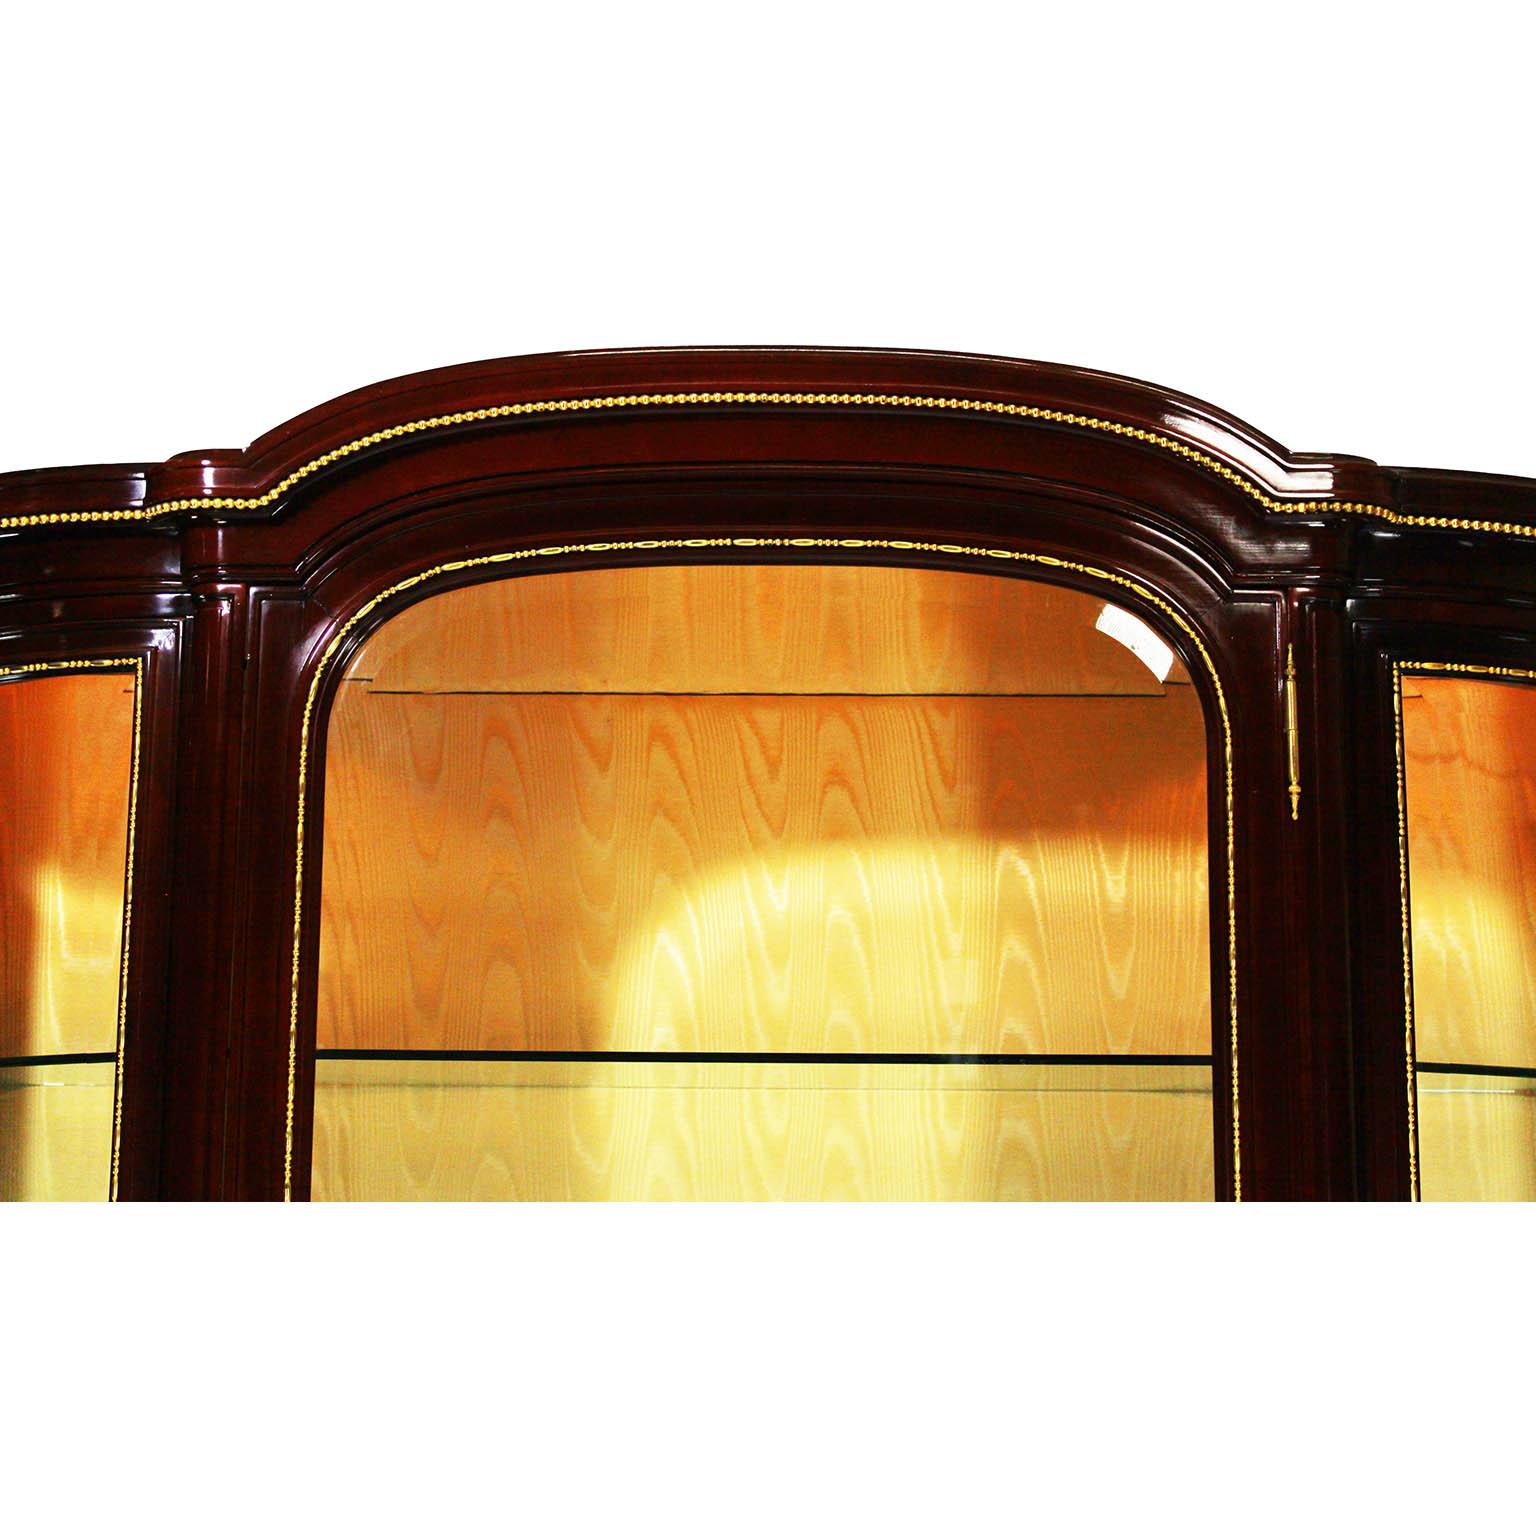 French 19th/20th Century Louis XV Style Mahogany and Gilt-Bronze Mounted Vitrine For Sale 4